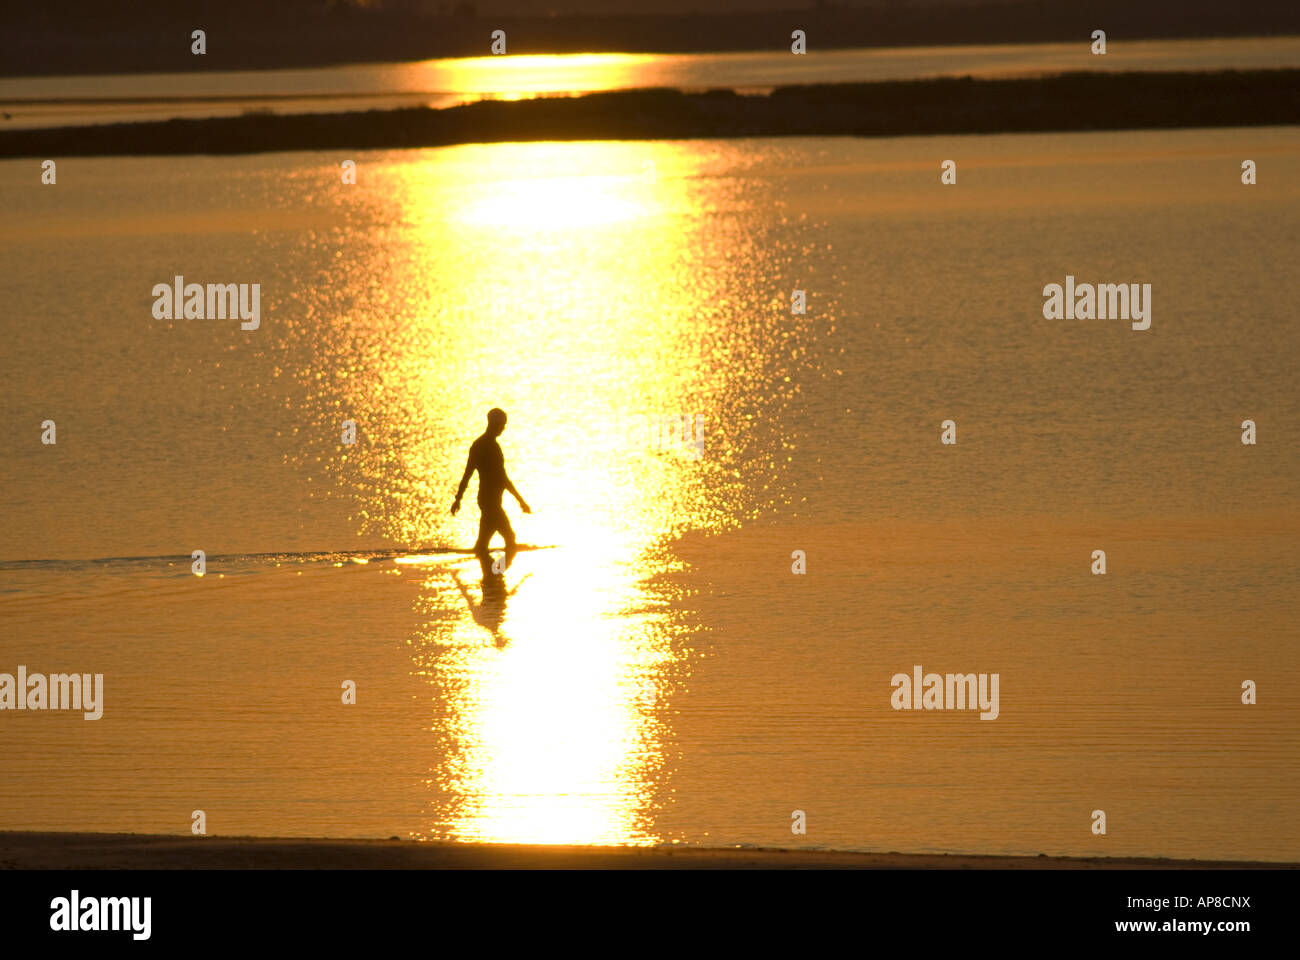 Silhouette of lone fisherman standing in water at sunrise, Compo Beach, Westport, Ct. USA. Stock Photo